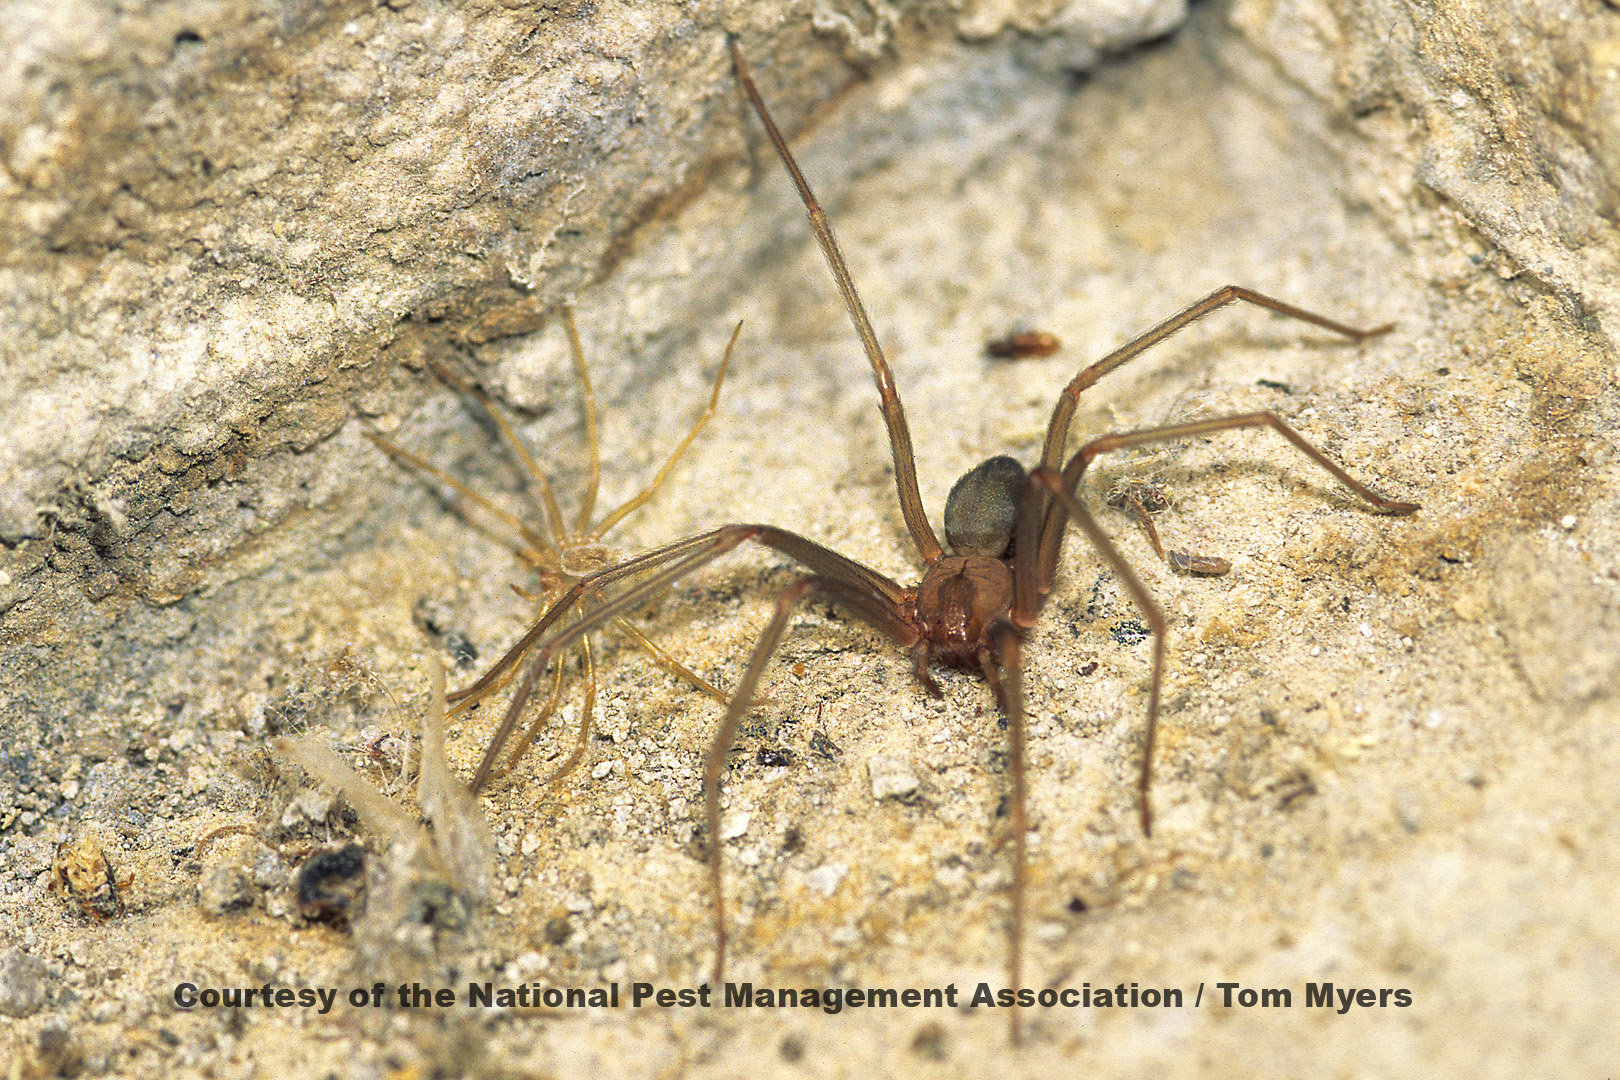 Brown Recluse Spiders - Spider Information for Students